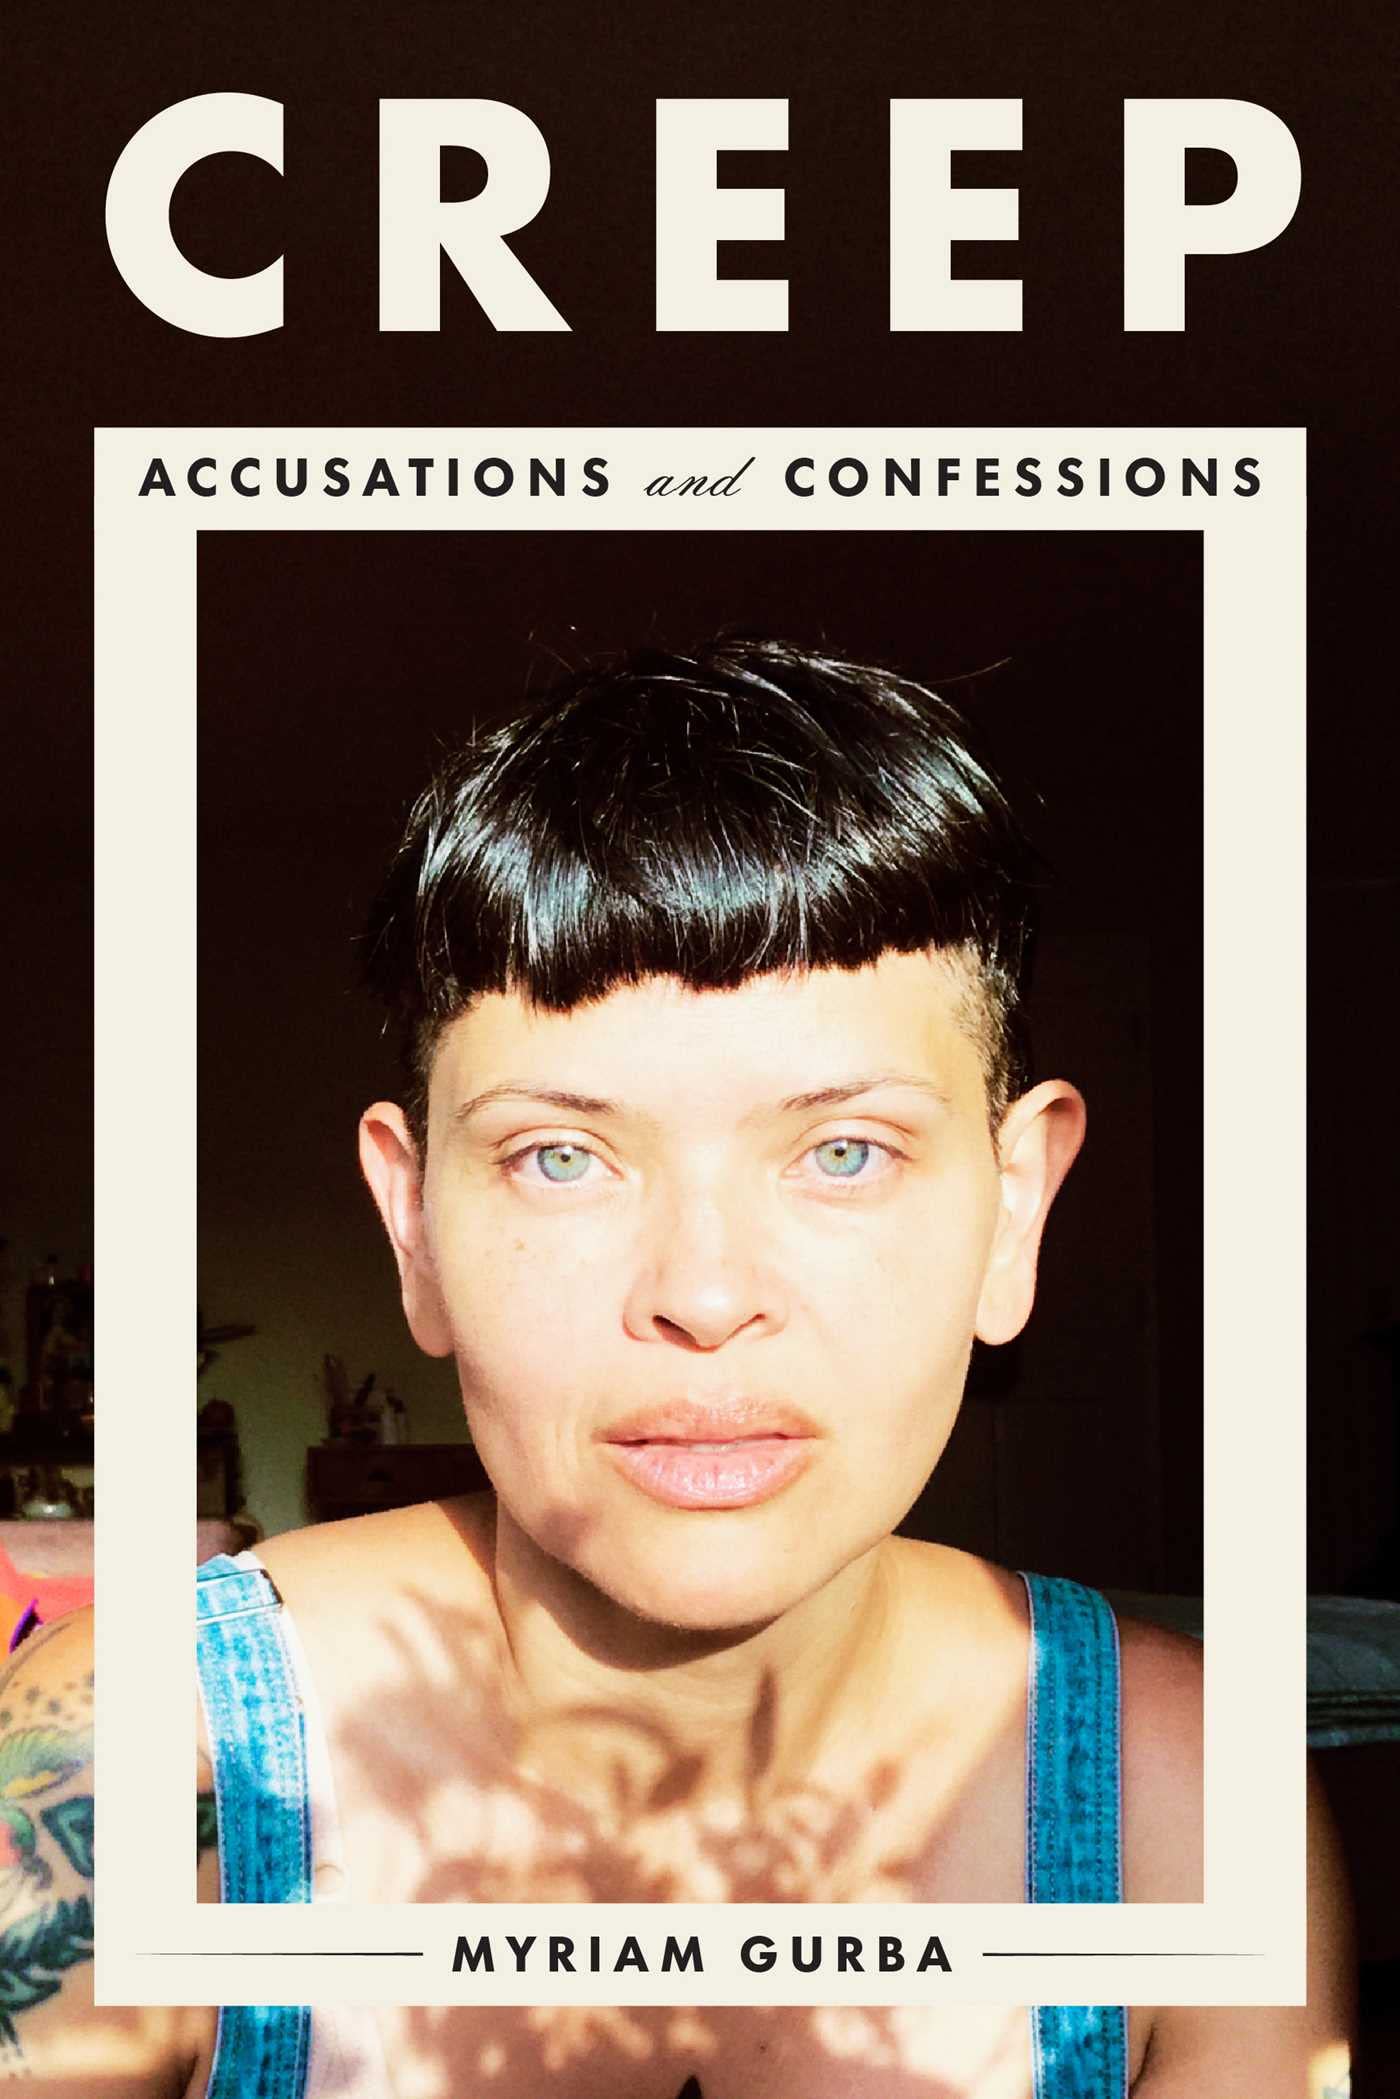 Creep // Accusations and Confessions